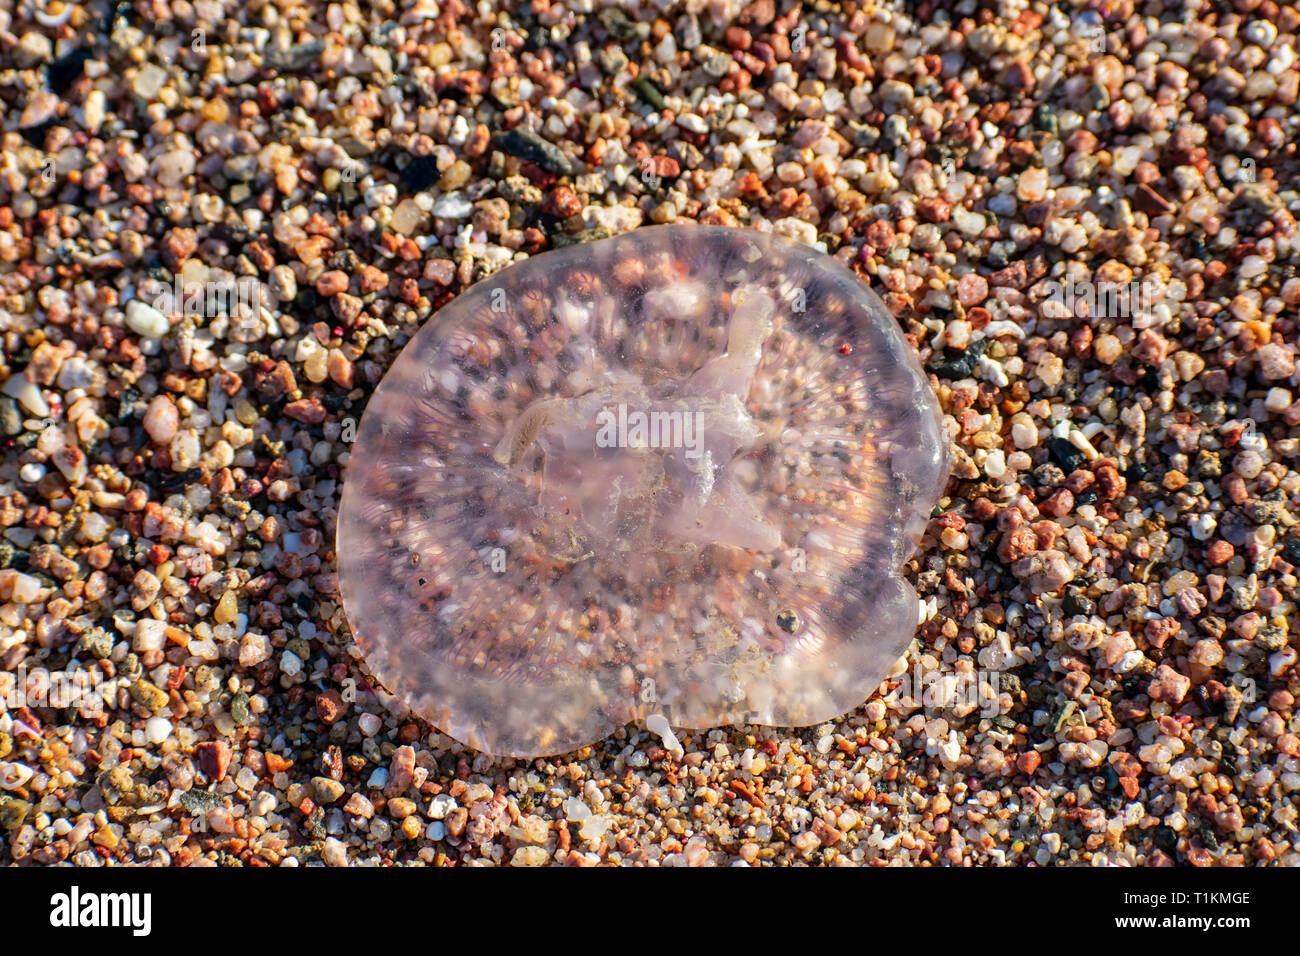 Jellyfish washed up on the beach during low tide. Egypt. Stock Photo